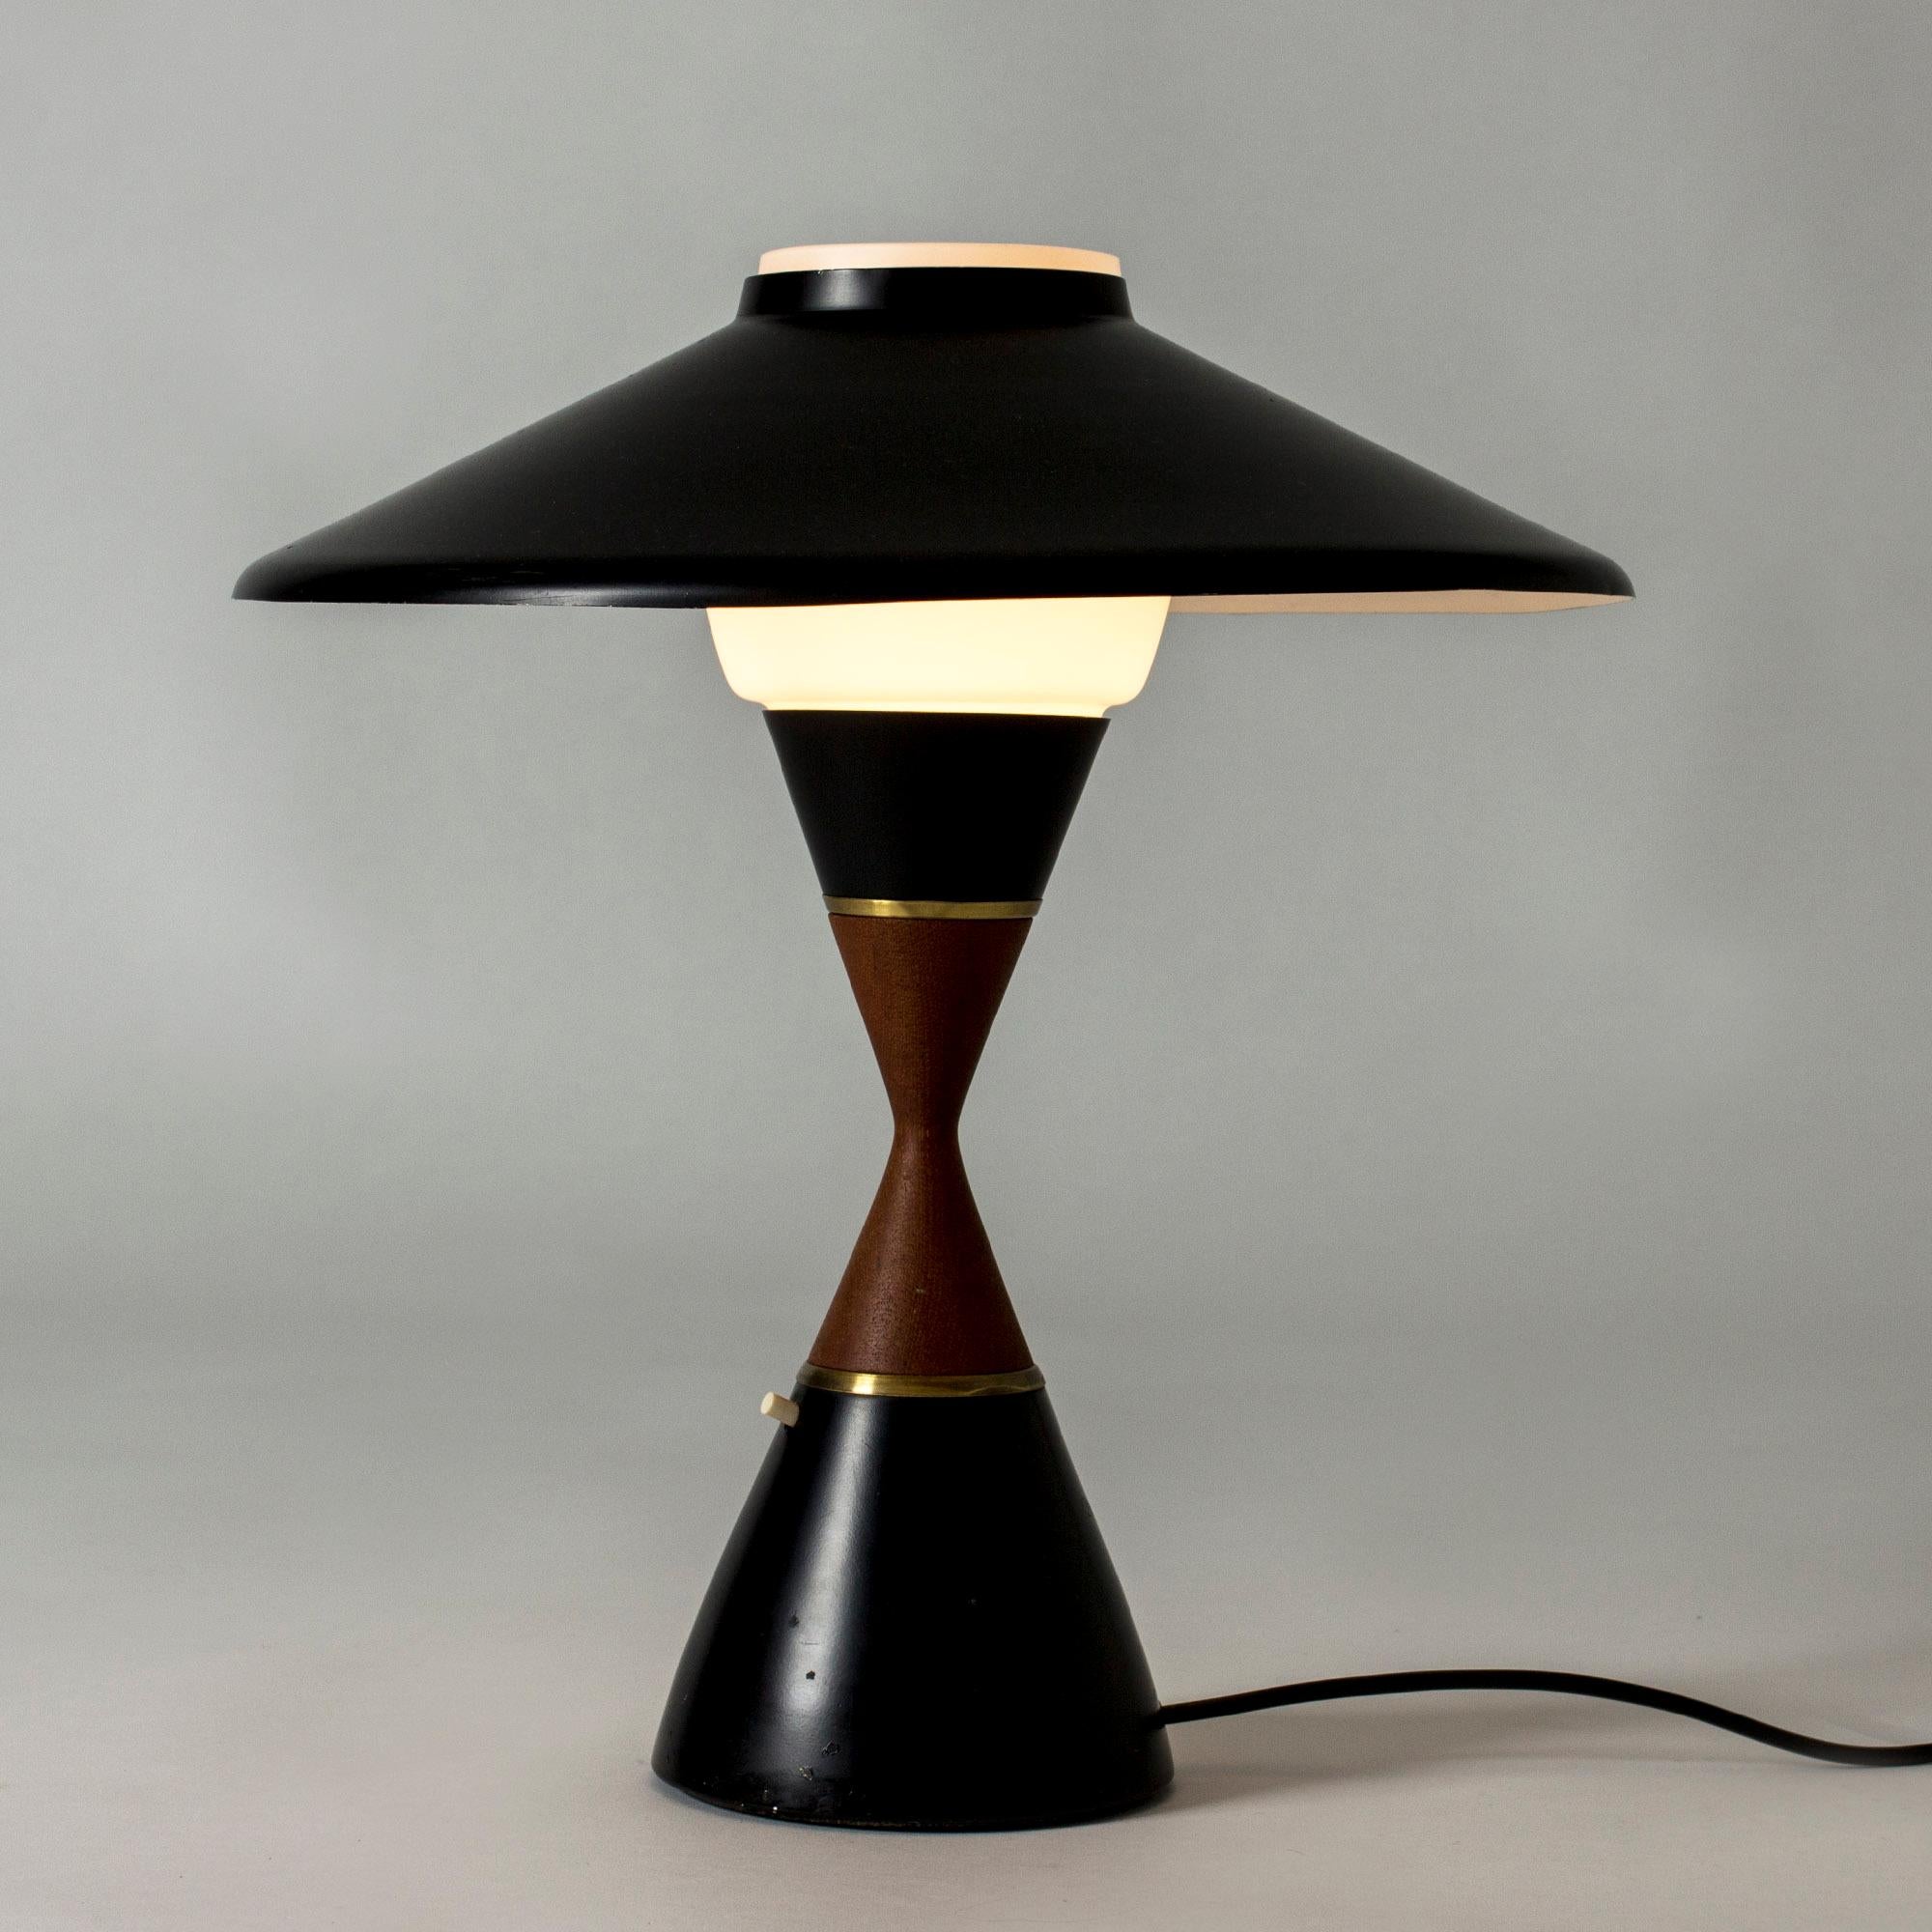 Table lamp in a cool design with graphic lines by Svend Aage Holm Sørensen. Black lacquered metal and teak waist.